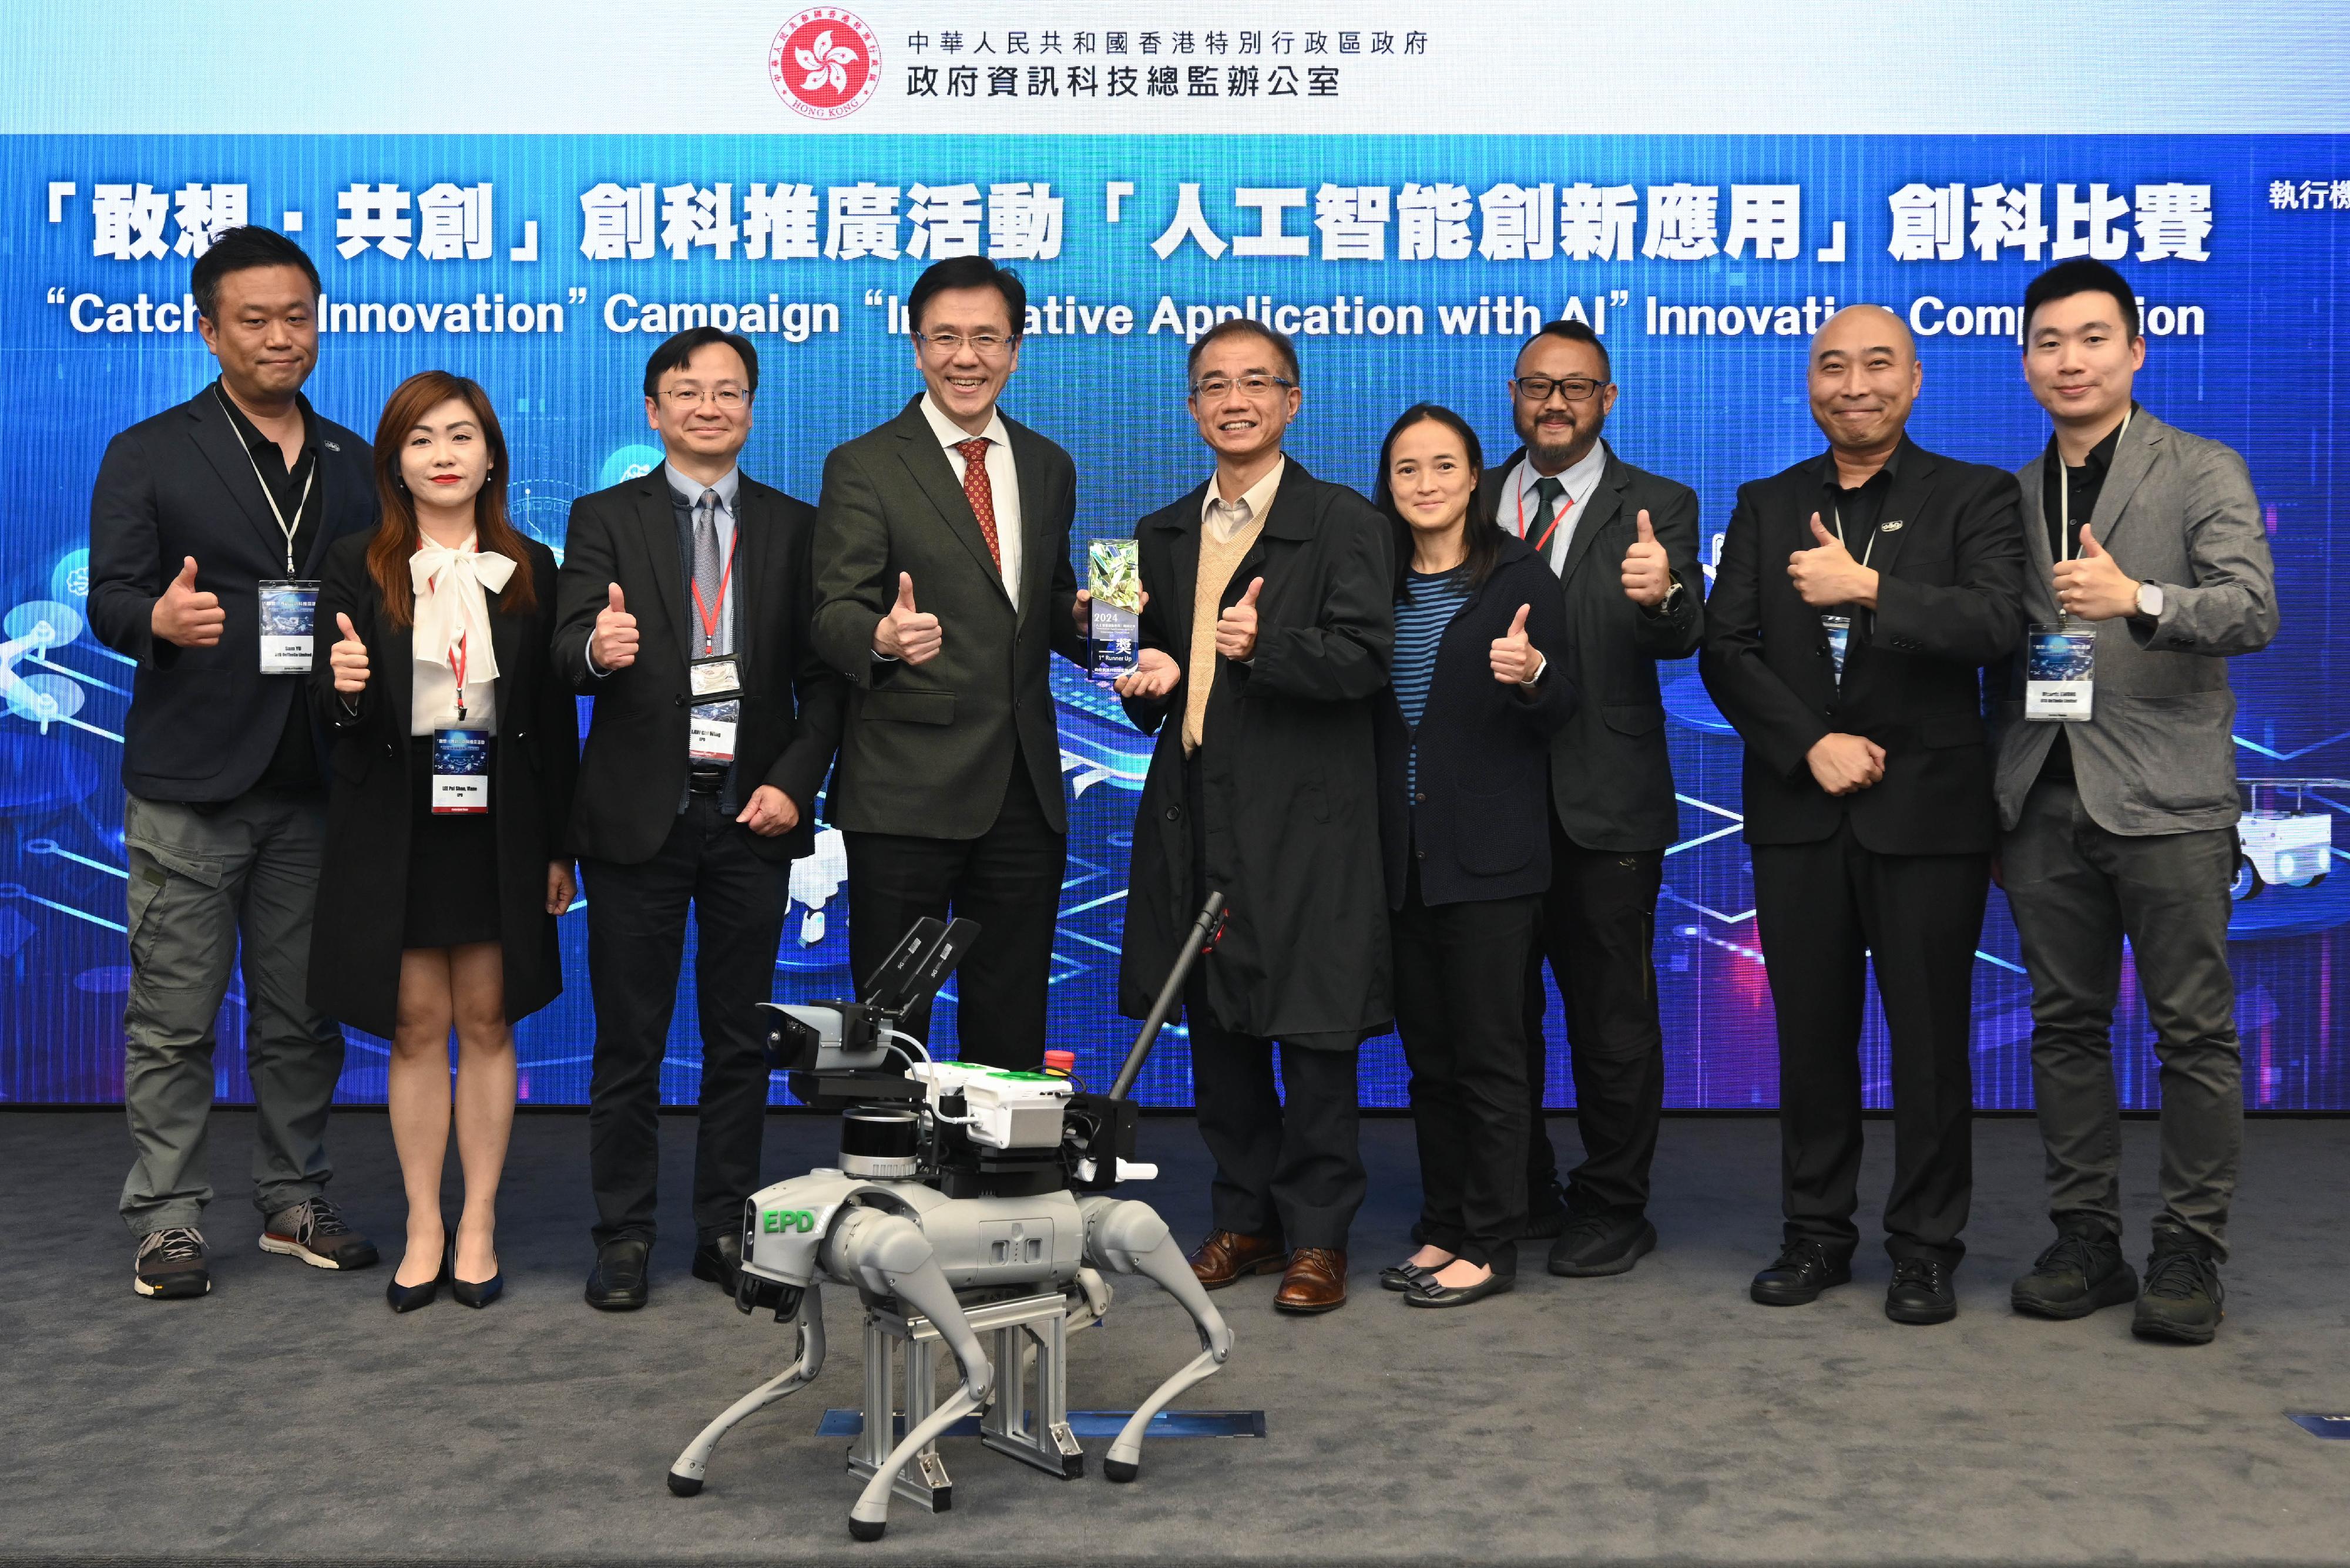 The Secretary for Innovation, Technology and Industry, Professor Sun Dong (fourth left), presents the first runner-up award to team members of the project "AI Environmental Air Nuisance Investigation Robot Dog" at the Award Presentation Ceremony for the "Innovative Application with AI" Innovation Competition today (March 15) and is pictured with representatives of the relevant department and the service provider. The department to which the team members belong is the Environmental Protection Department.